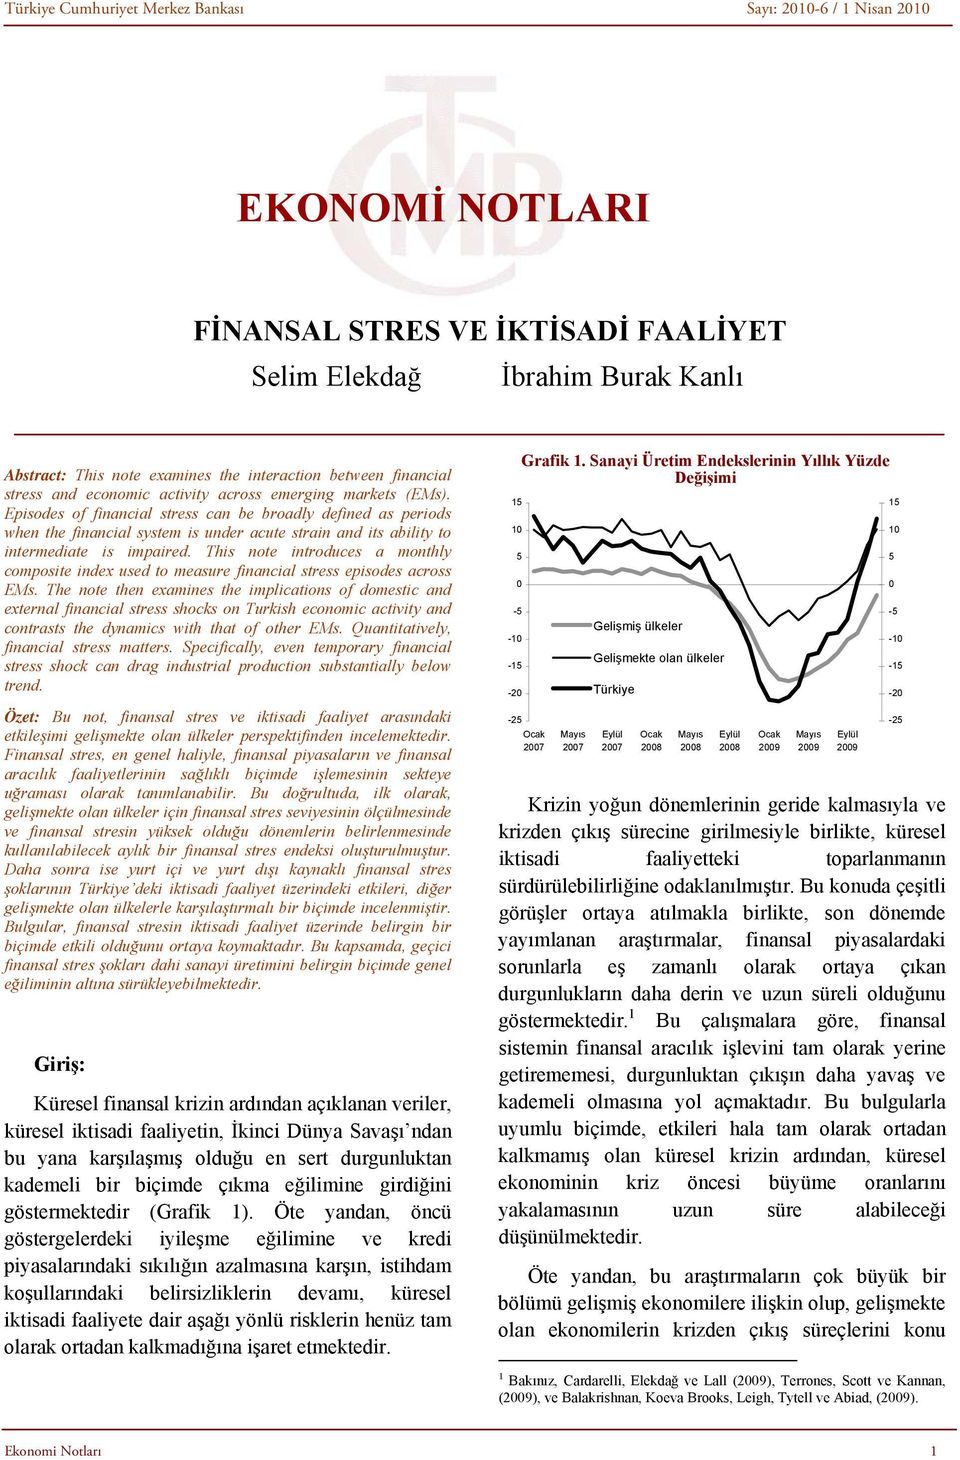 Episodes of financial sress can be broadly defined as periods when he financial sysem is under acue srain and is abiliy o inermediae is impaired.